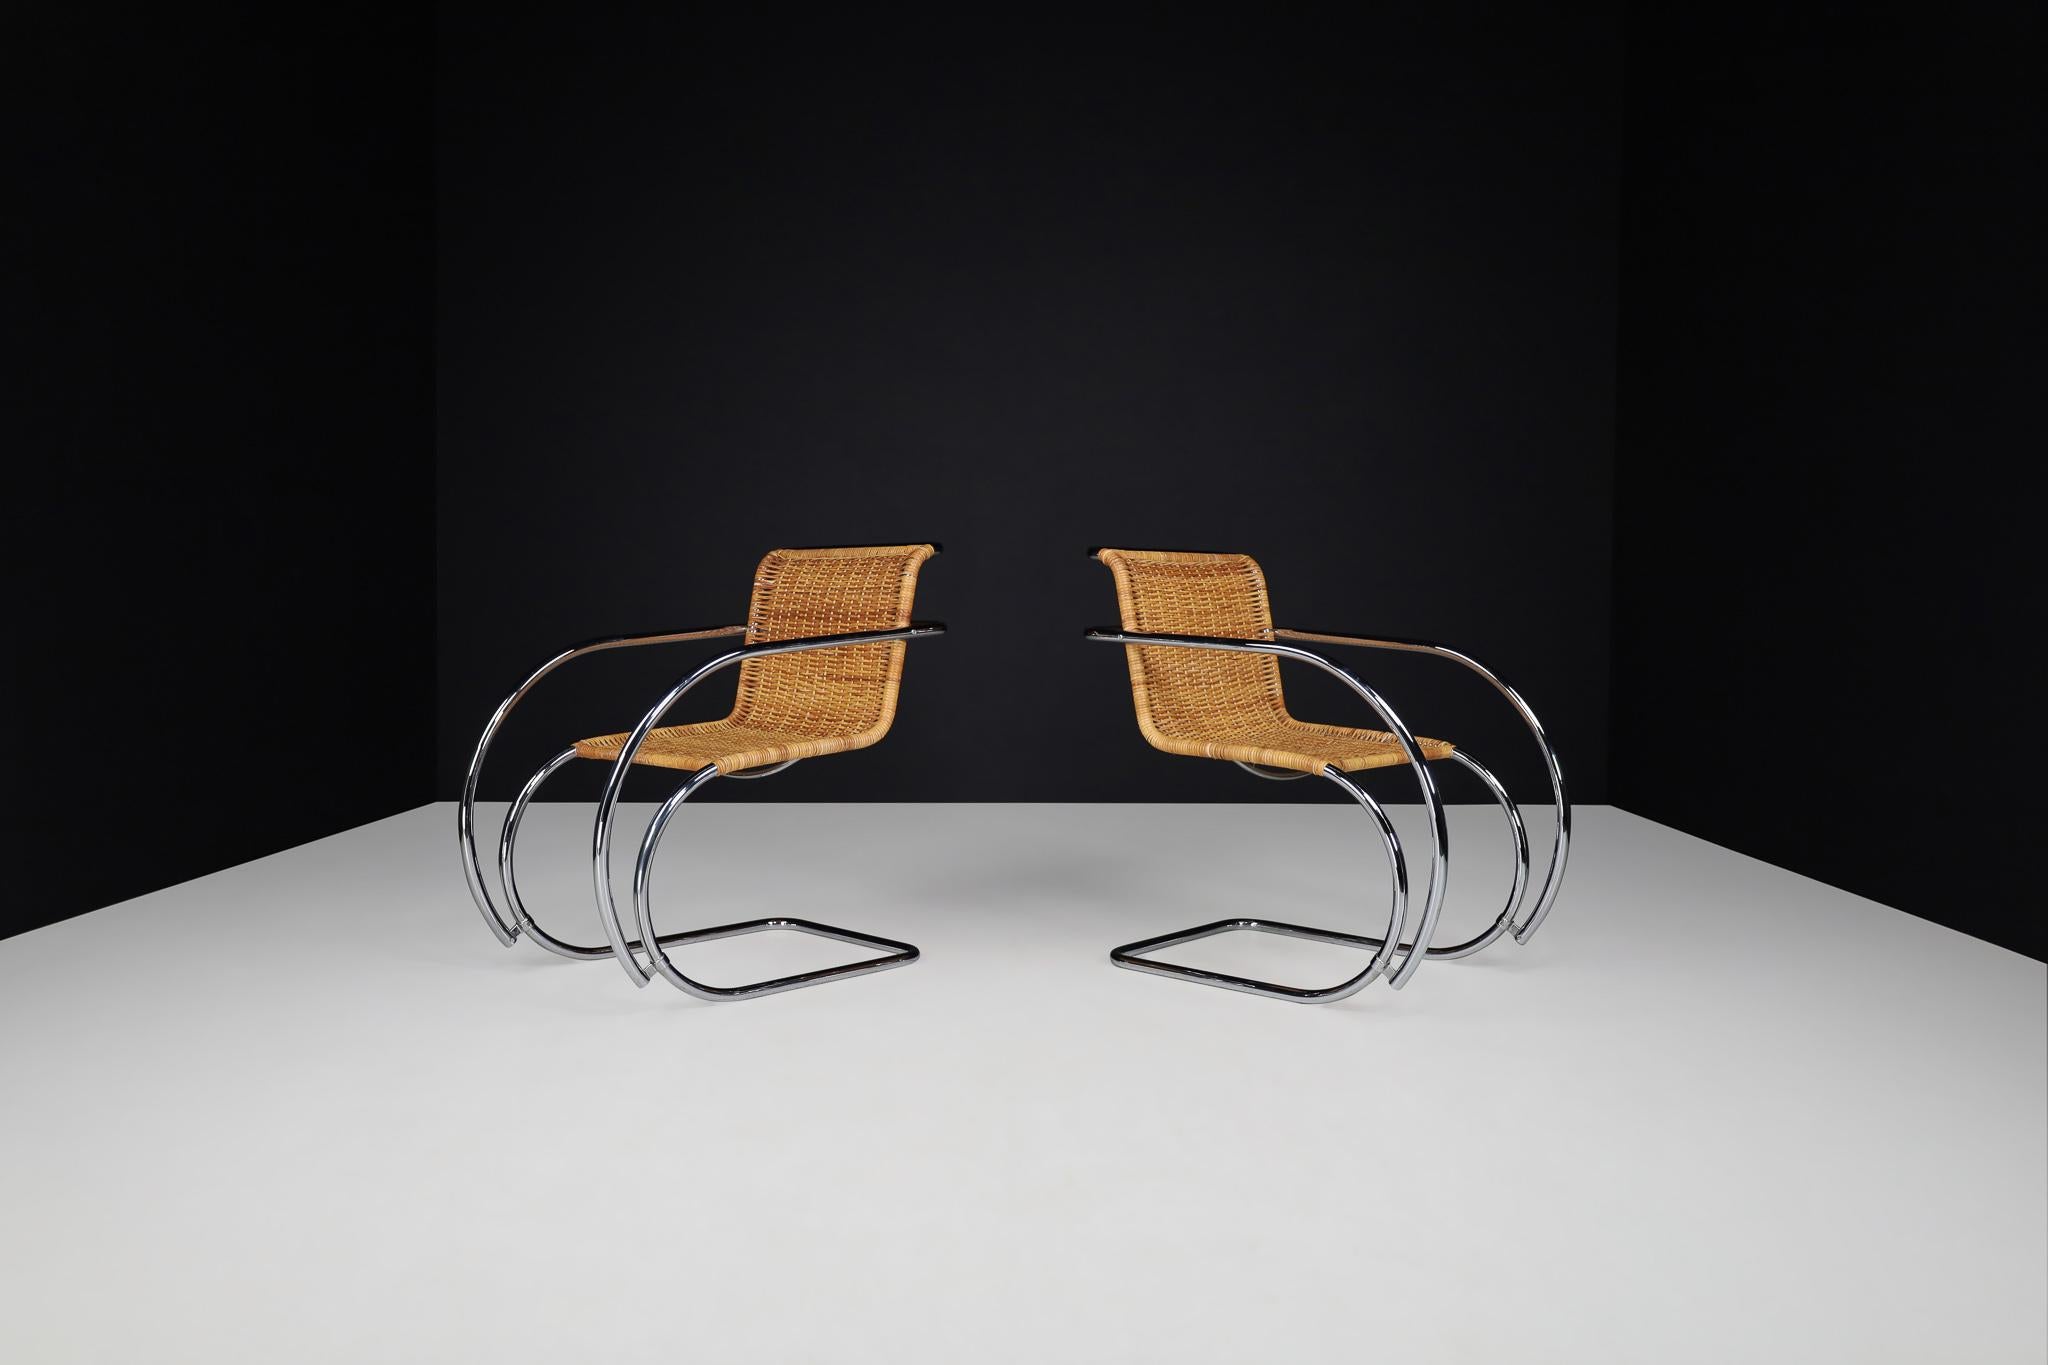 Stunning original Mies Van der rohe M20 lounge chair made from wicker and chrome. The wicker is in a great vintage state. The chromed tubular steel frame has an ultra-modern style and contrasts with the wicker seat, which has a natural feel. Favored